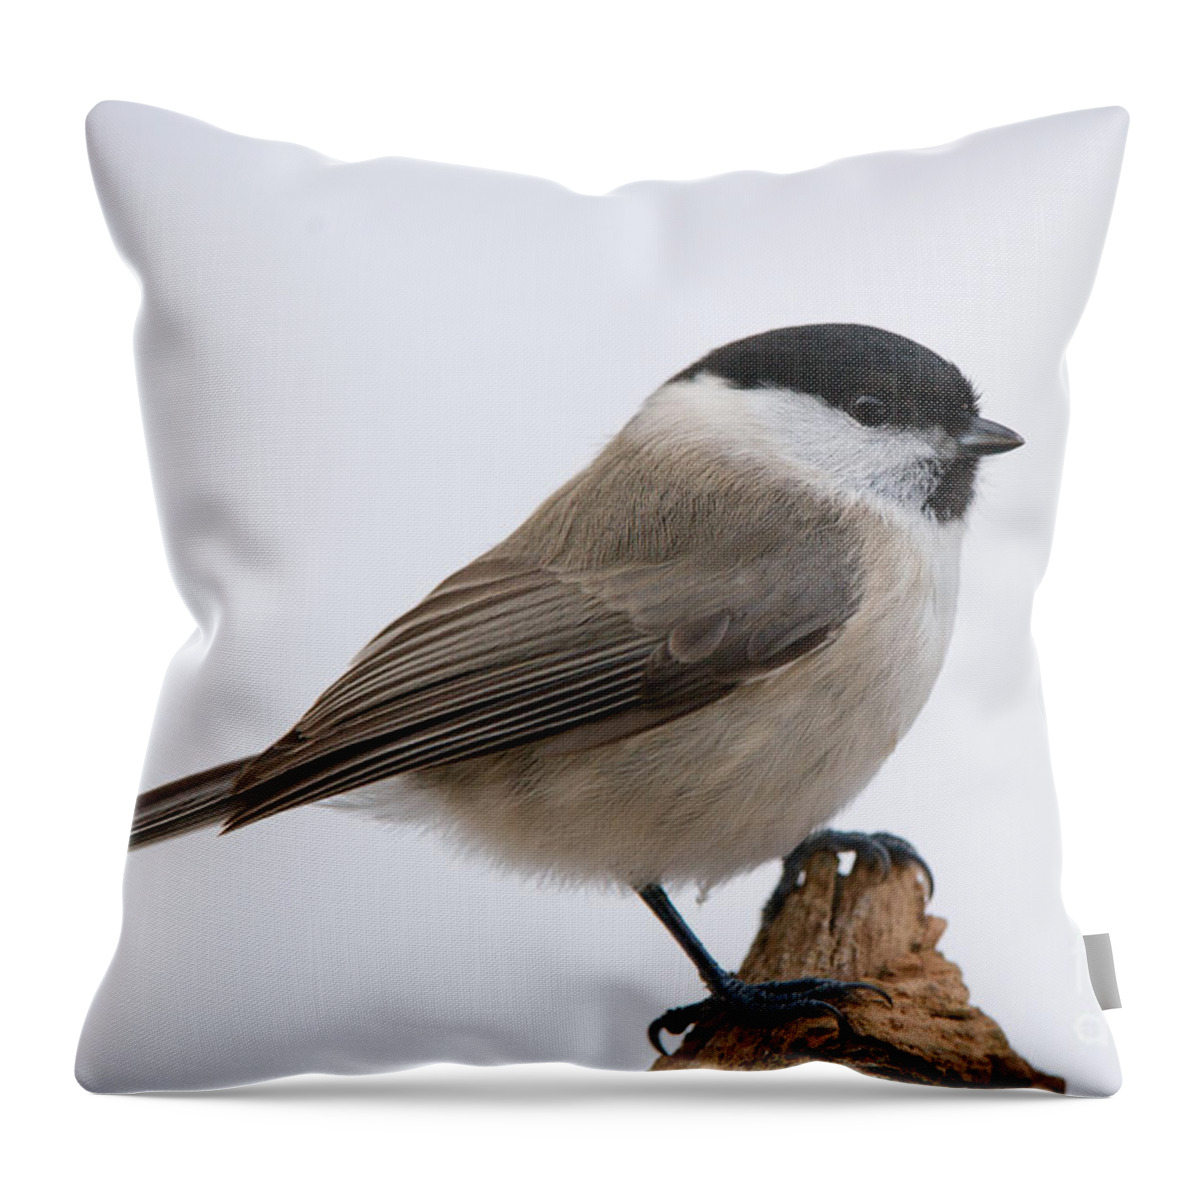 Titmouse Throw Pillow featuring the photograph Titmouse by Torbjorn Swenelius